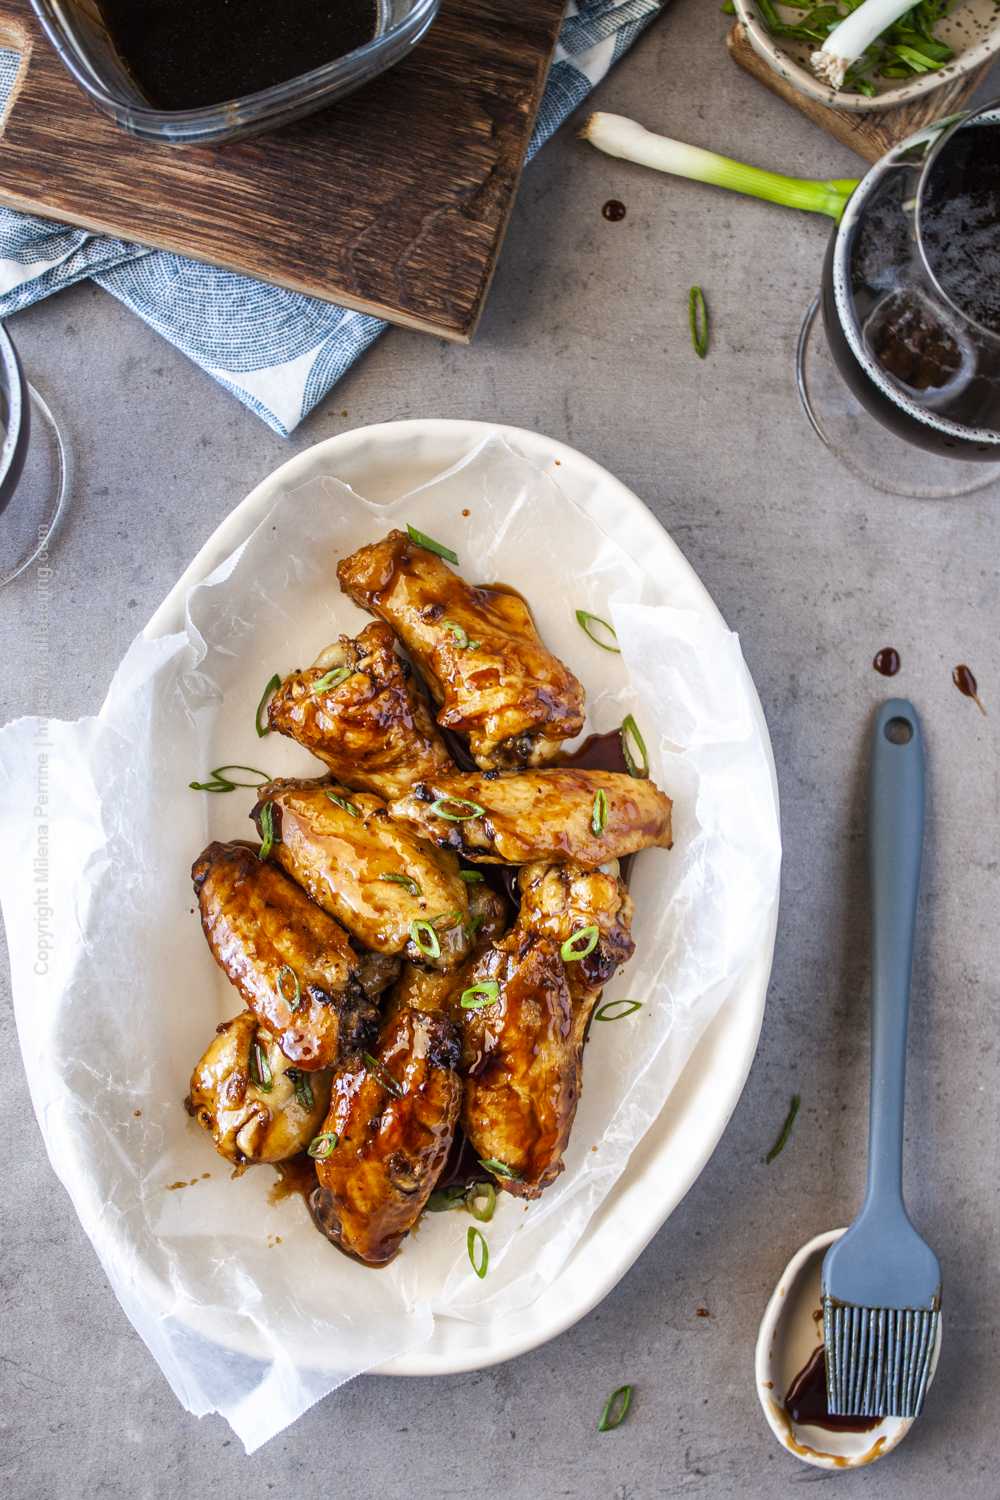 Bourbon chicken wings - delicious bourbon glaze applied over baked chicken wings.